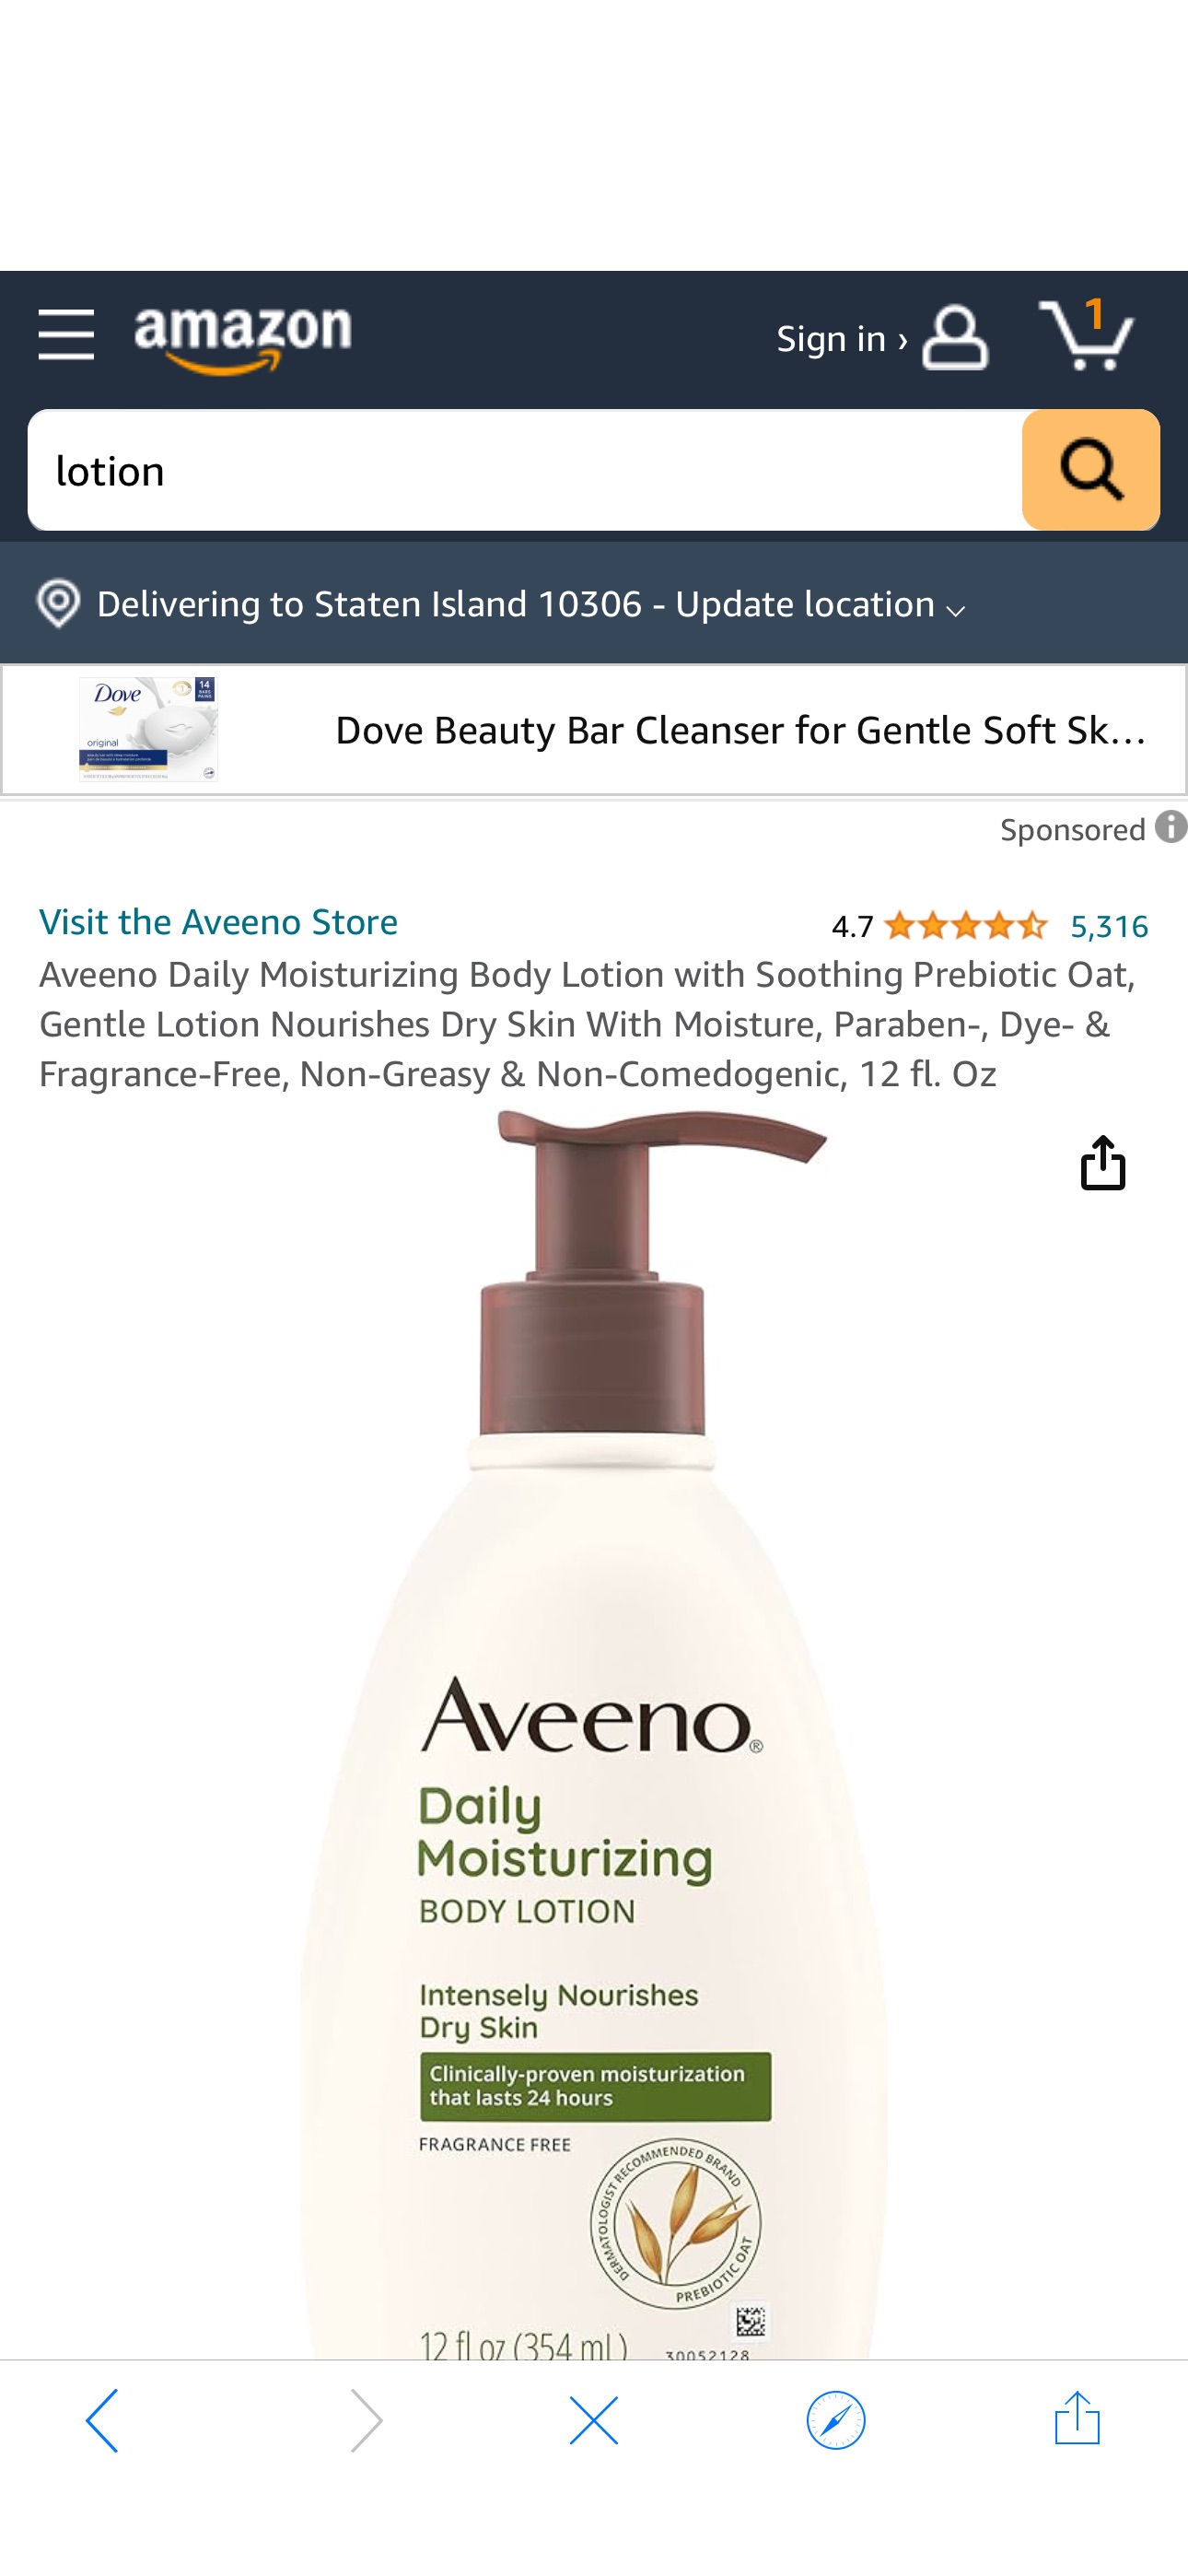 Amazon.com : Aveeno Daily Moisturizing Body Lotion with Soothing Prebiotic Oat, Gentle Lotion Nourishes Dry Skin With Moisture, Paraben-, Dye- & Fragrance-Free, Non-Greasy & Non-Comedogenic, 12 fl. Oz